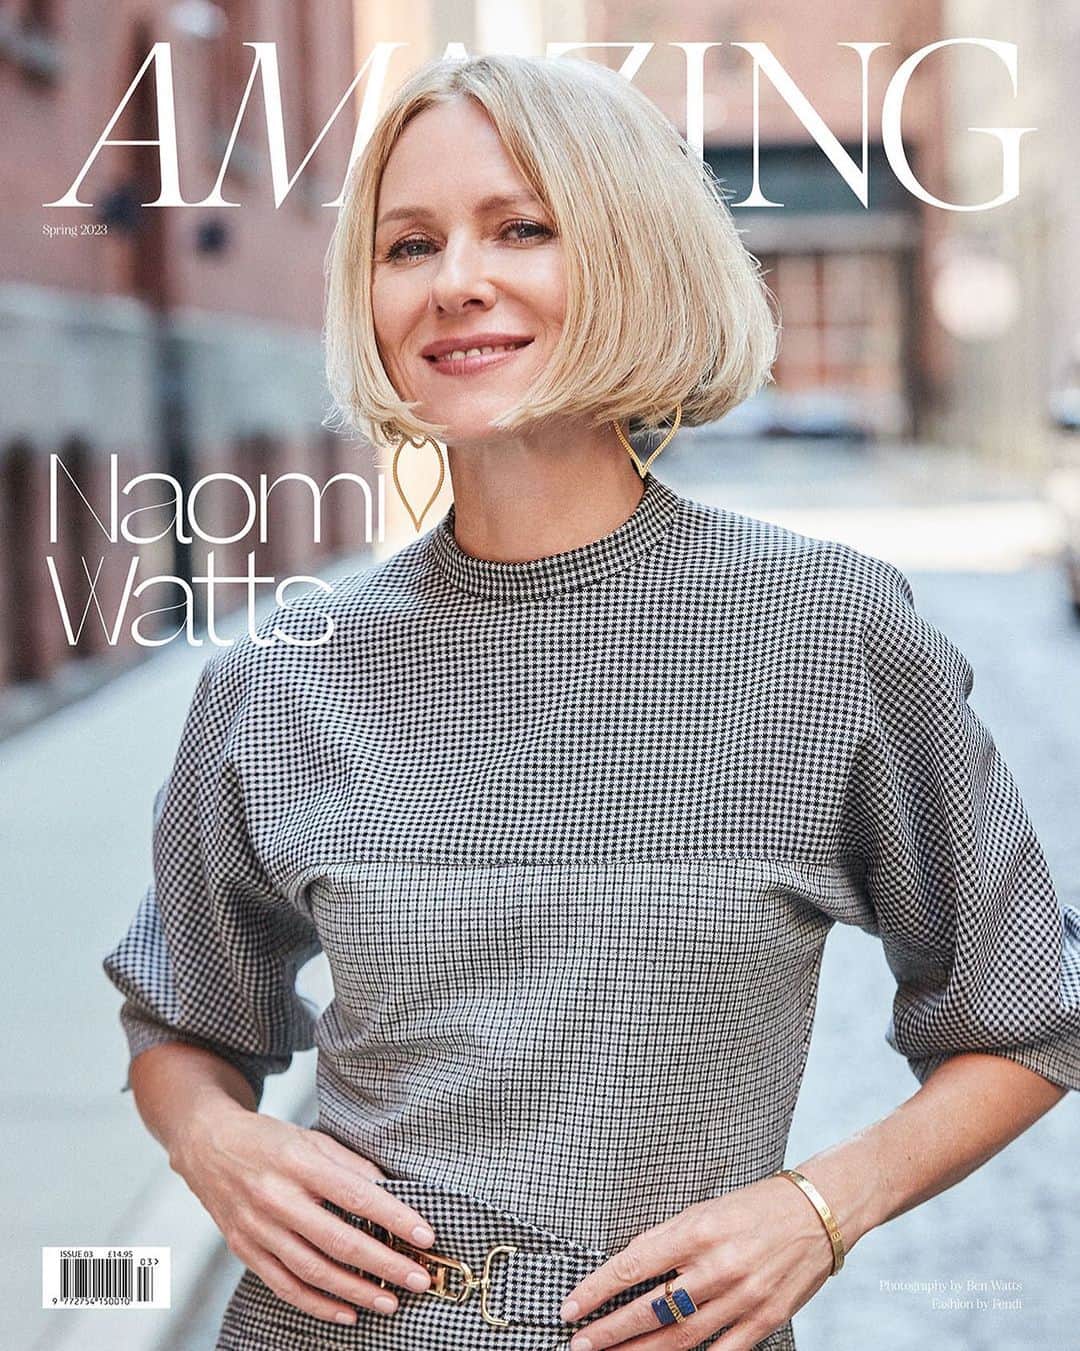 ナオミ・ワッツのインスタグラム：「Fresh from a standout performance in The Watcher and back on set for Feud: Capote’s Women, twice Oscar-nominated actor @naomiwatts is also turning her hand to something entirely new: supporting and educating women through menopause. Her menopause wellness company and community, @iam_stripes, launched its first 11 products in October 2022.  “We have the products to support women, but really the brand is three-pronged,” says Watts. “We want to have a community, because that's half the solve of the problem, just knowing that somebody's out there going through the same stuff that you are going through. Then there’s the education piece; we have doctors on our advisory board and we always want to be completely up to date with the current research, because obviously it's evolving now even more, as this is the first time the community has come together and said, ‘I deserve support and the right treatment.’”  For Naomi’s full interview and shoot, pre-order your copy of AMAZING issue 3 now at theamazingmagazine.com.   @naomiwatts wears @fendi  Photographed by @wattsupphoto represented by @artdeptagency Styled by @xgabriela represented by @kramerandkramer Hair by @rebekahforecast at David Mallett Salon NYC for @thewallgroup Makeup by @marywilesmakeup at @walterschupfermanagement Nails by @lookathisnails at @opusbeauty using @opi Words by @barbiesnaps Creative & Editorial Director @huwgwyther   Editor-in-Chief @julietherd Cover Design by @harry_conor & @aparna_aji Digital Tech/Photo Assistant @jeff_sutera Special thanks to @slatepr and @netflix」